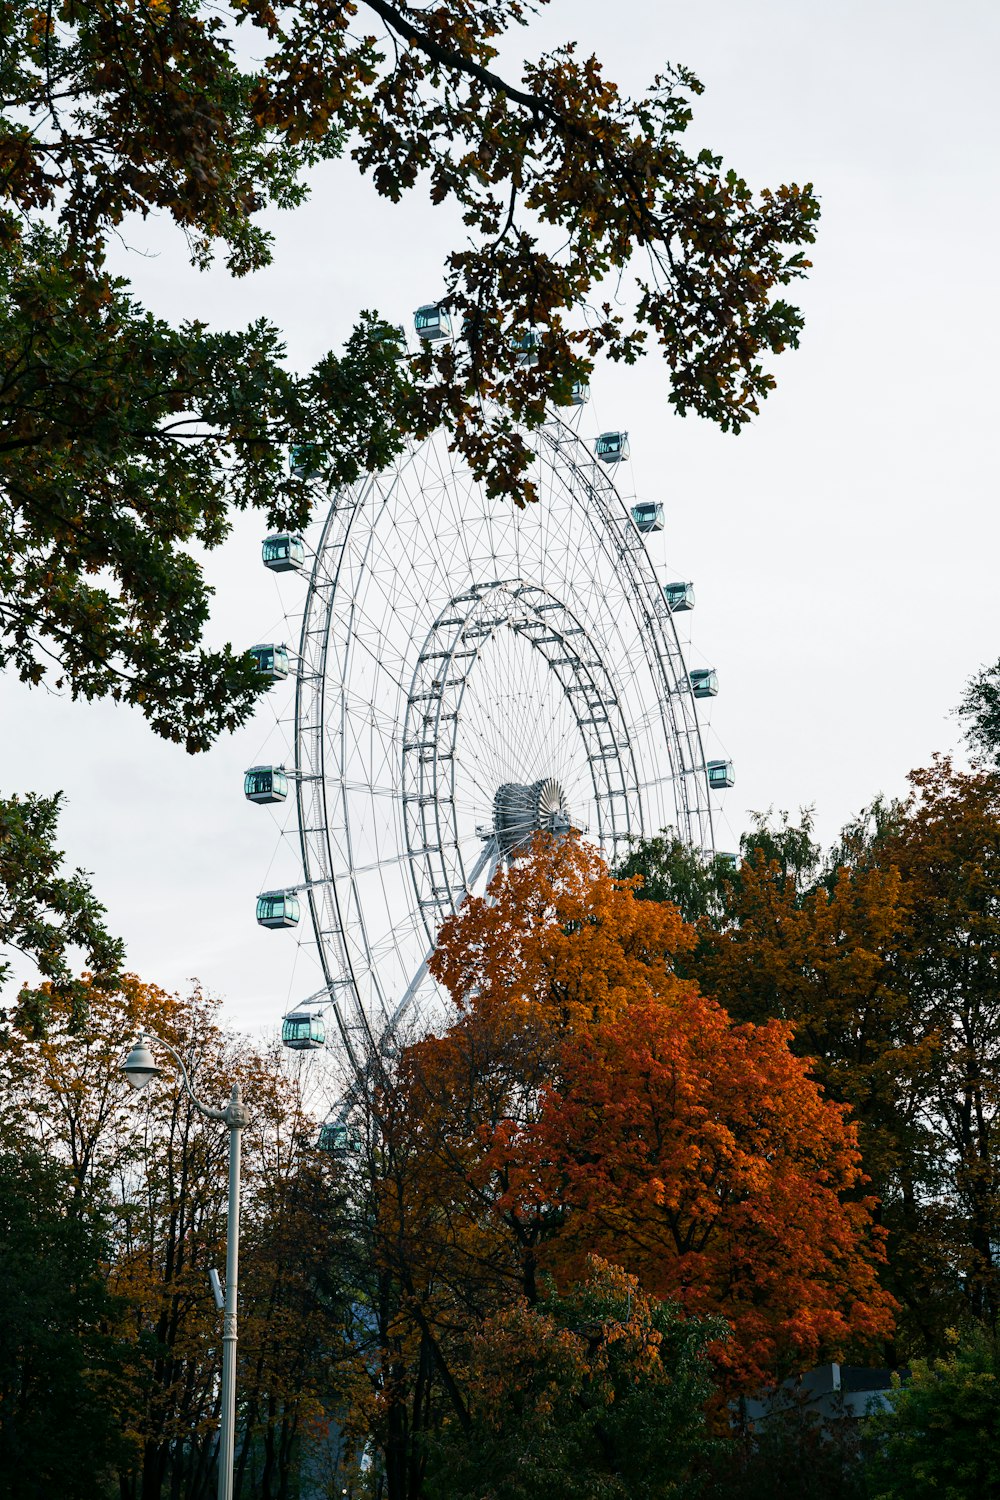 a large ferris wheel in the middle of a park